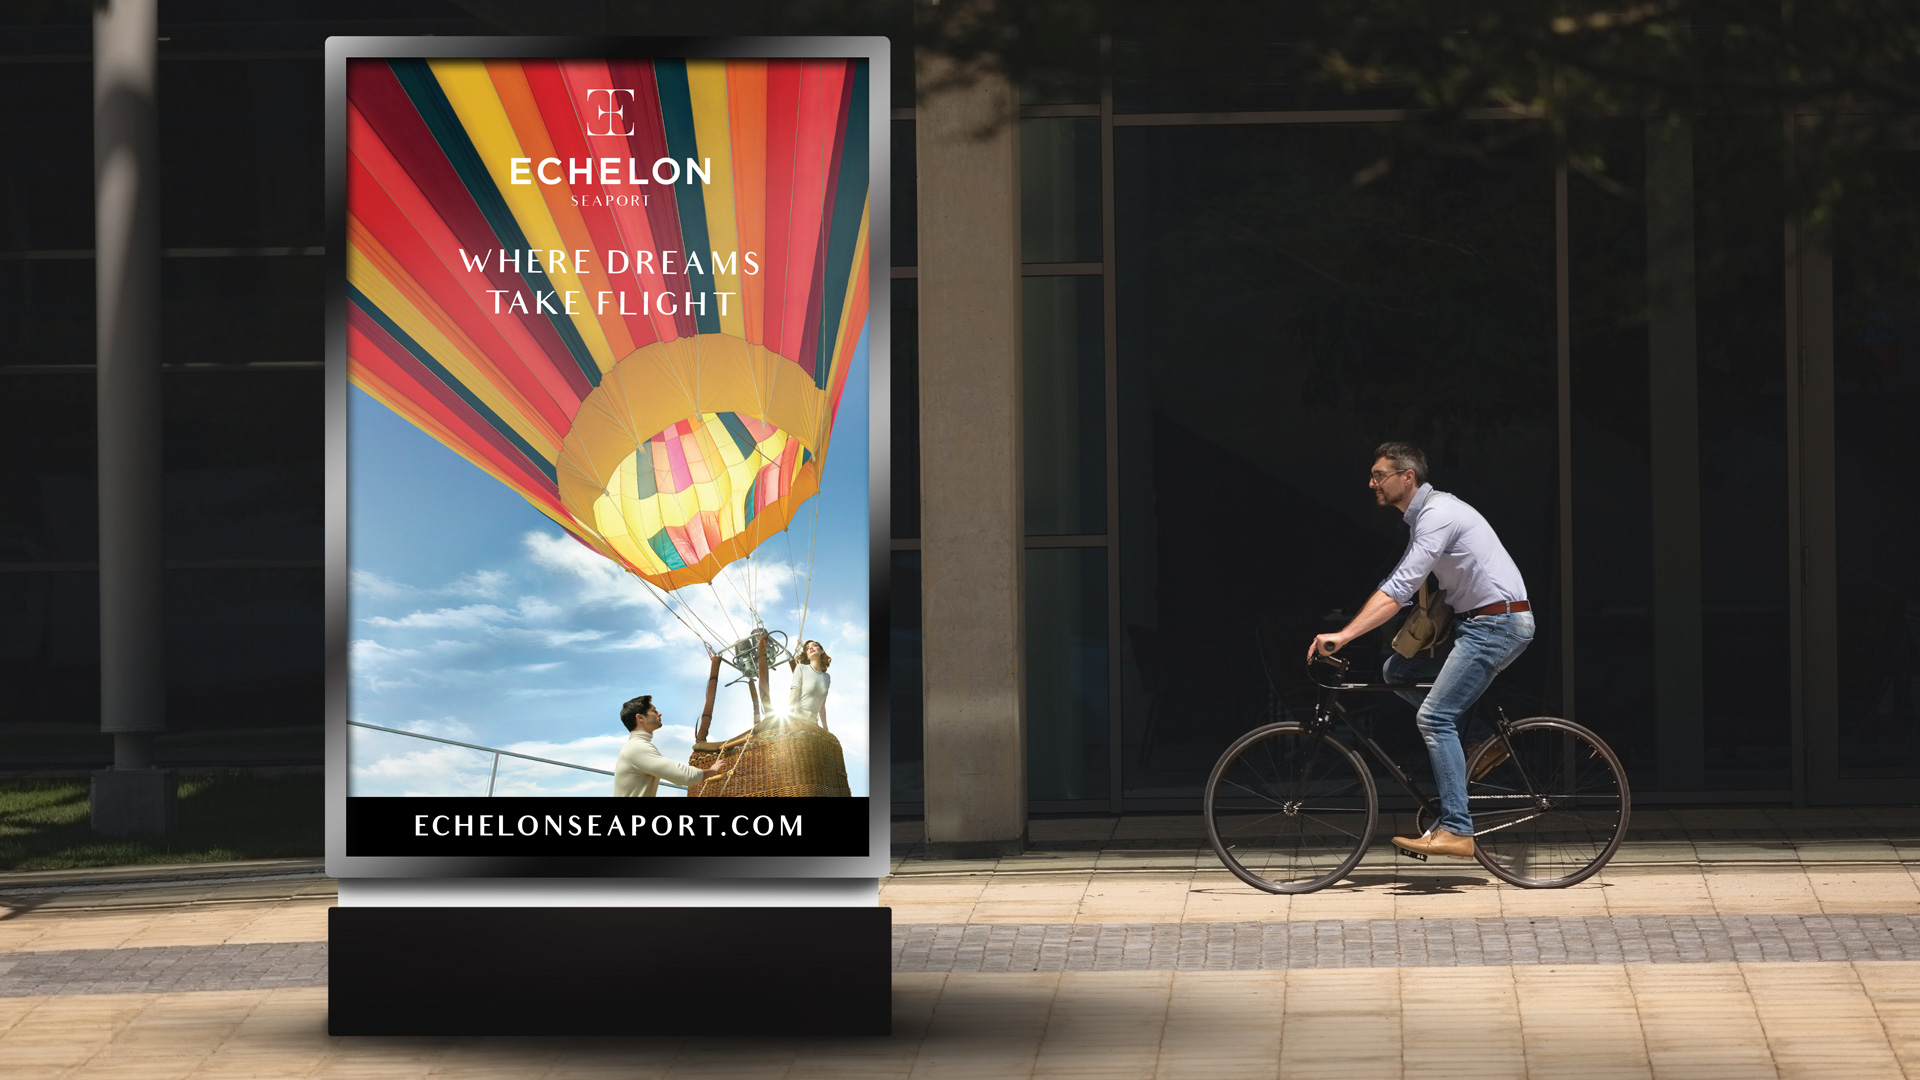 echelon seaport street sign with hot air balloon and person on bicycle in background